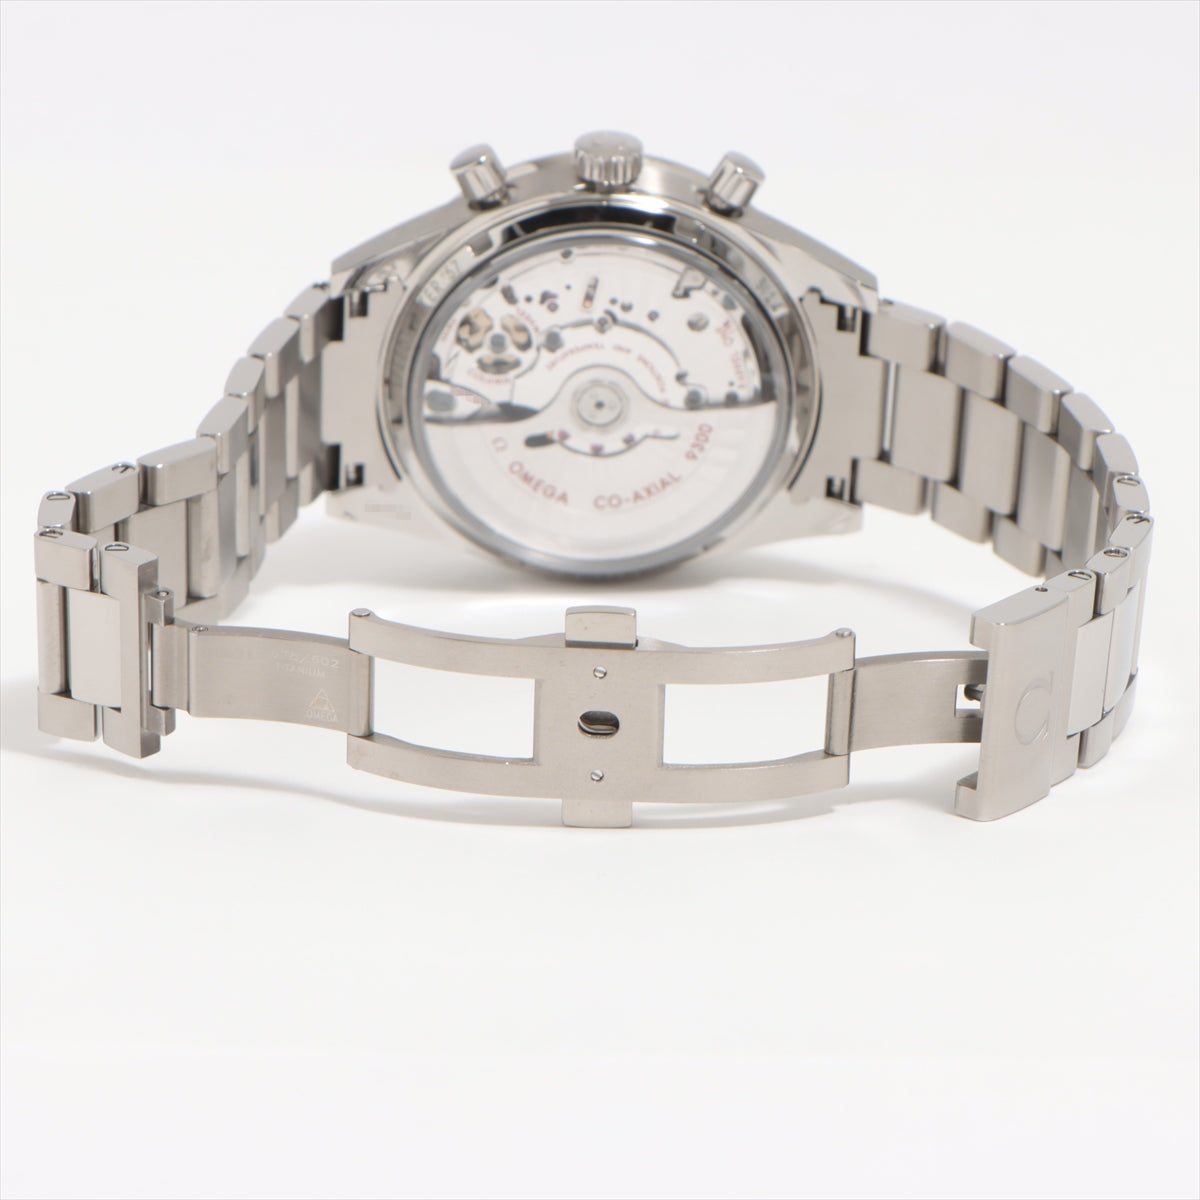 Omega Speedmaster 57 Coaxial Chronograph 331.90.42.51.04.001 TI AT White-Face Extra Link 2